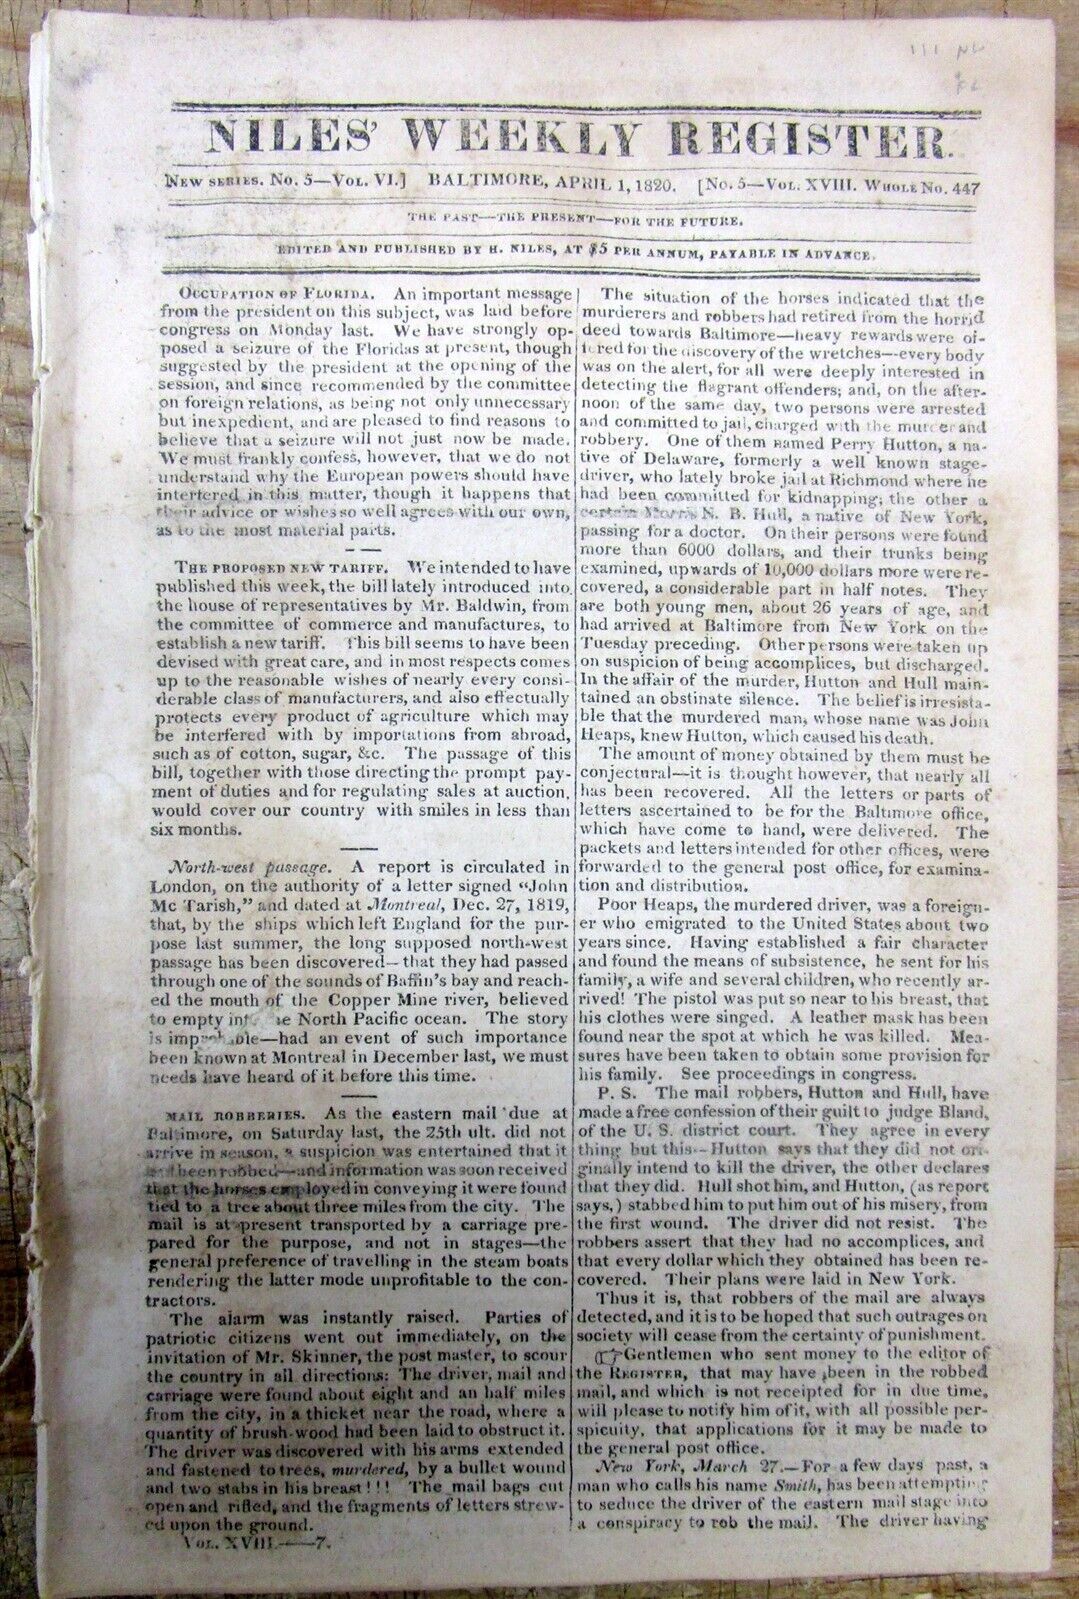 1820 newspaper DISCOVERY OF THE NORTHWEST PASSAGE +US takes over Spanish FLORIDA